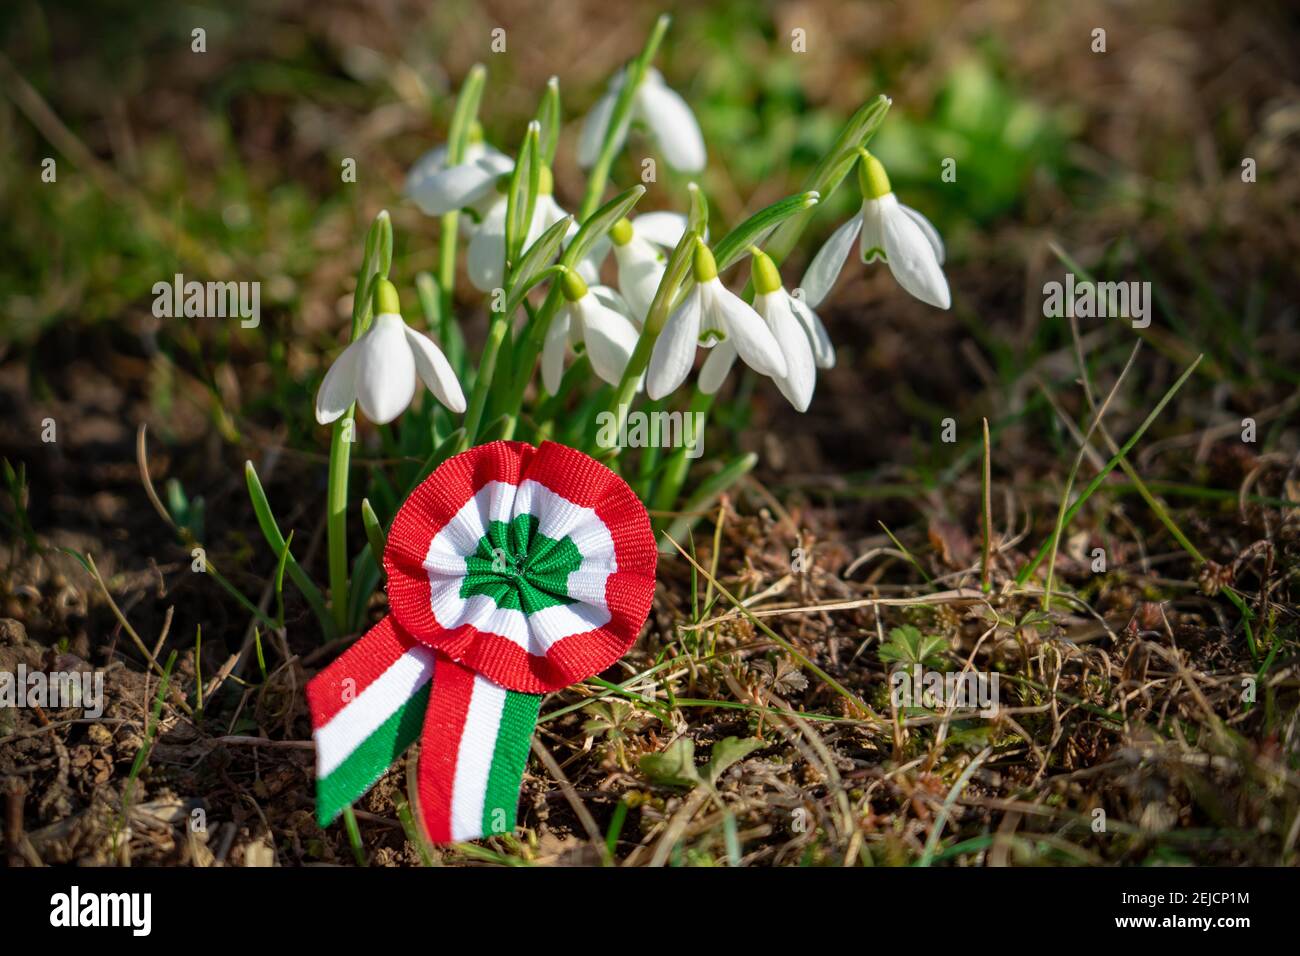 close up tricolor rosette symbol of the hungarian national day 15th of march with snowdrop fair maid flower . Stock Photo